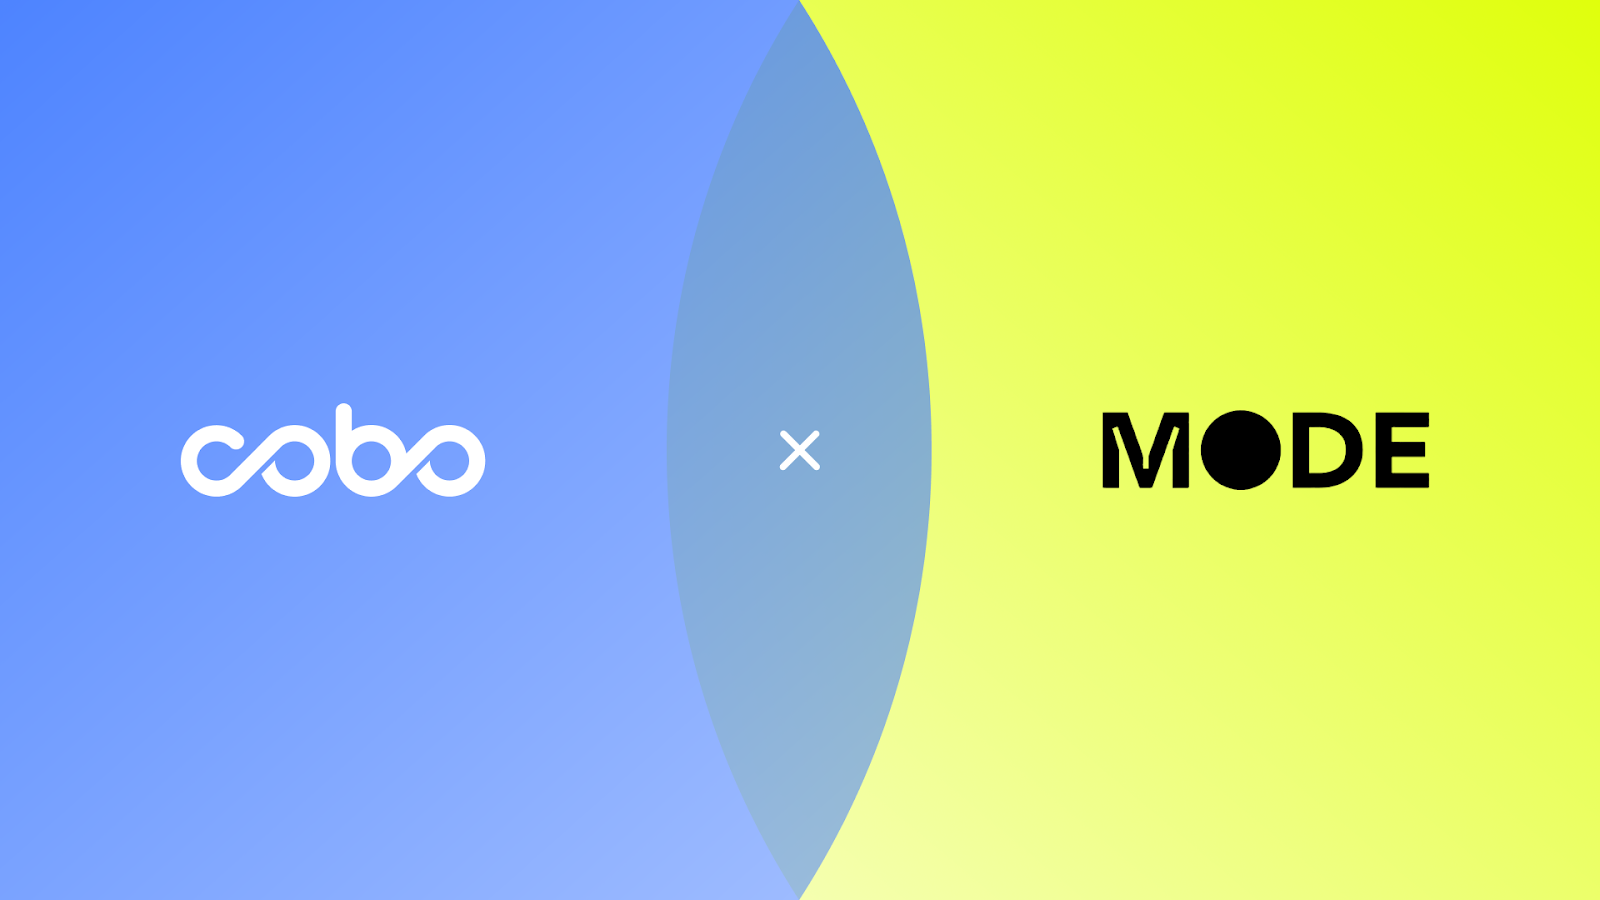 Cobo Integrates Mode Network to Enable Unprecedented Institutional Access